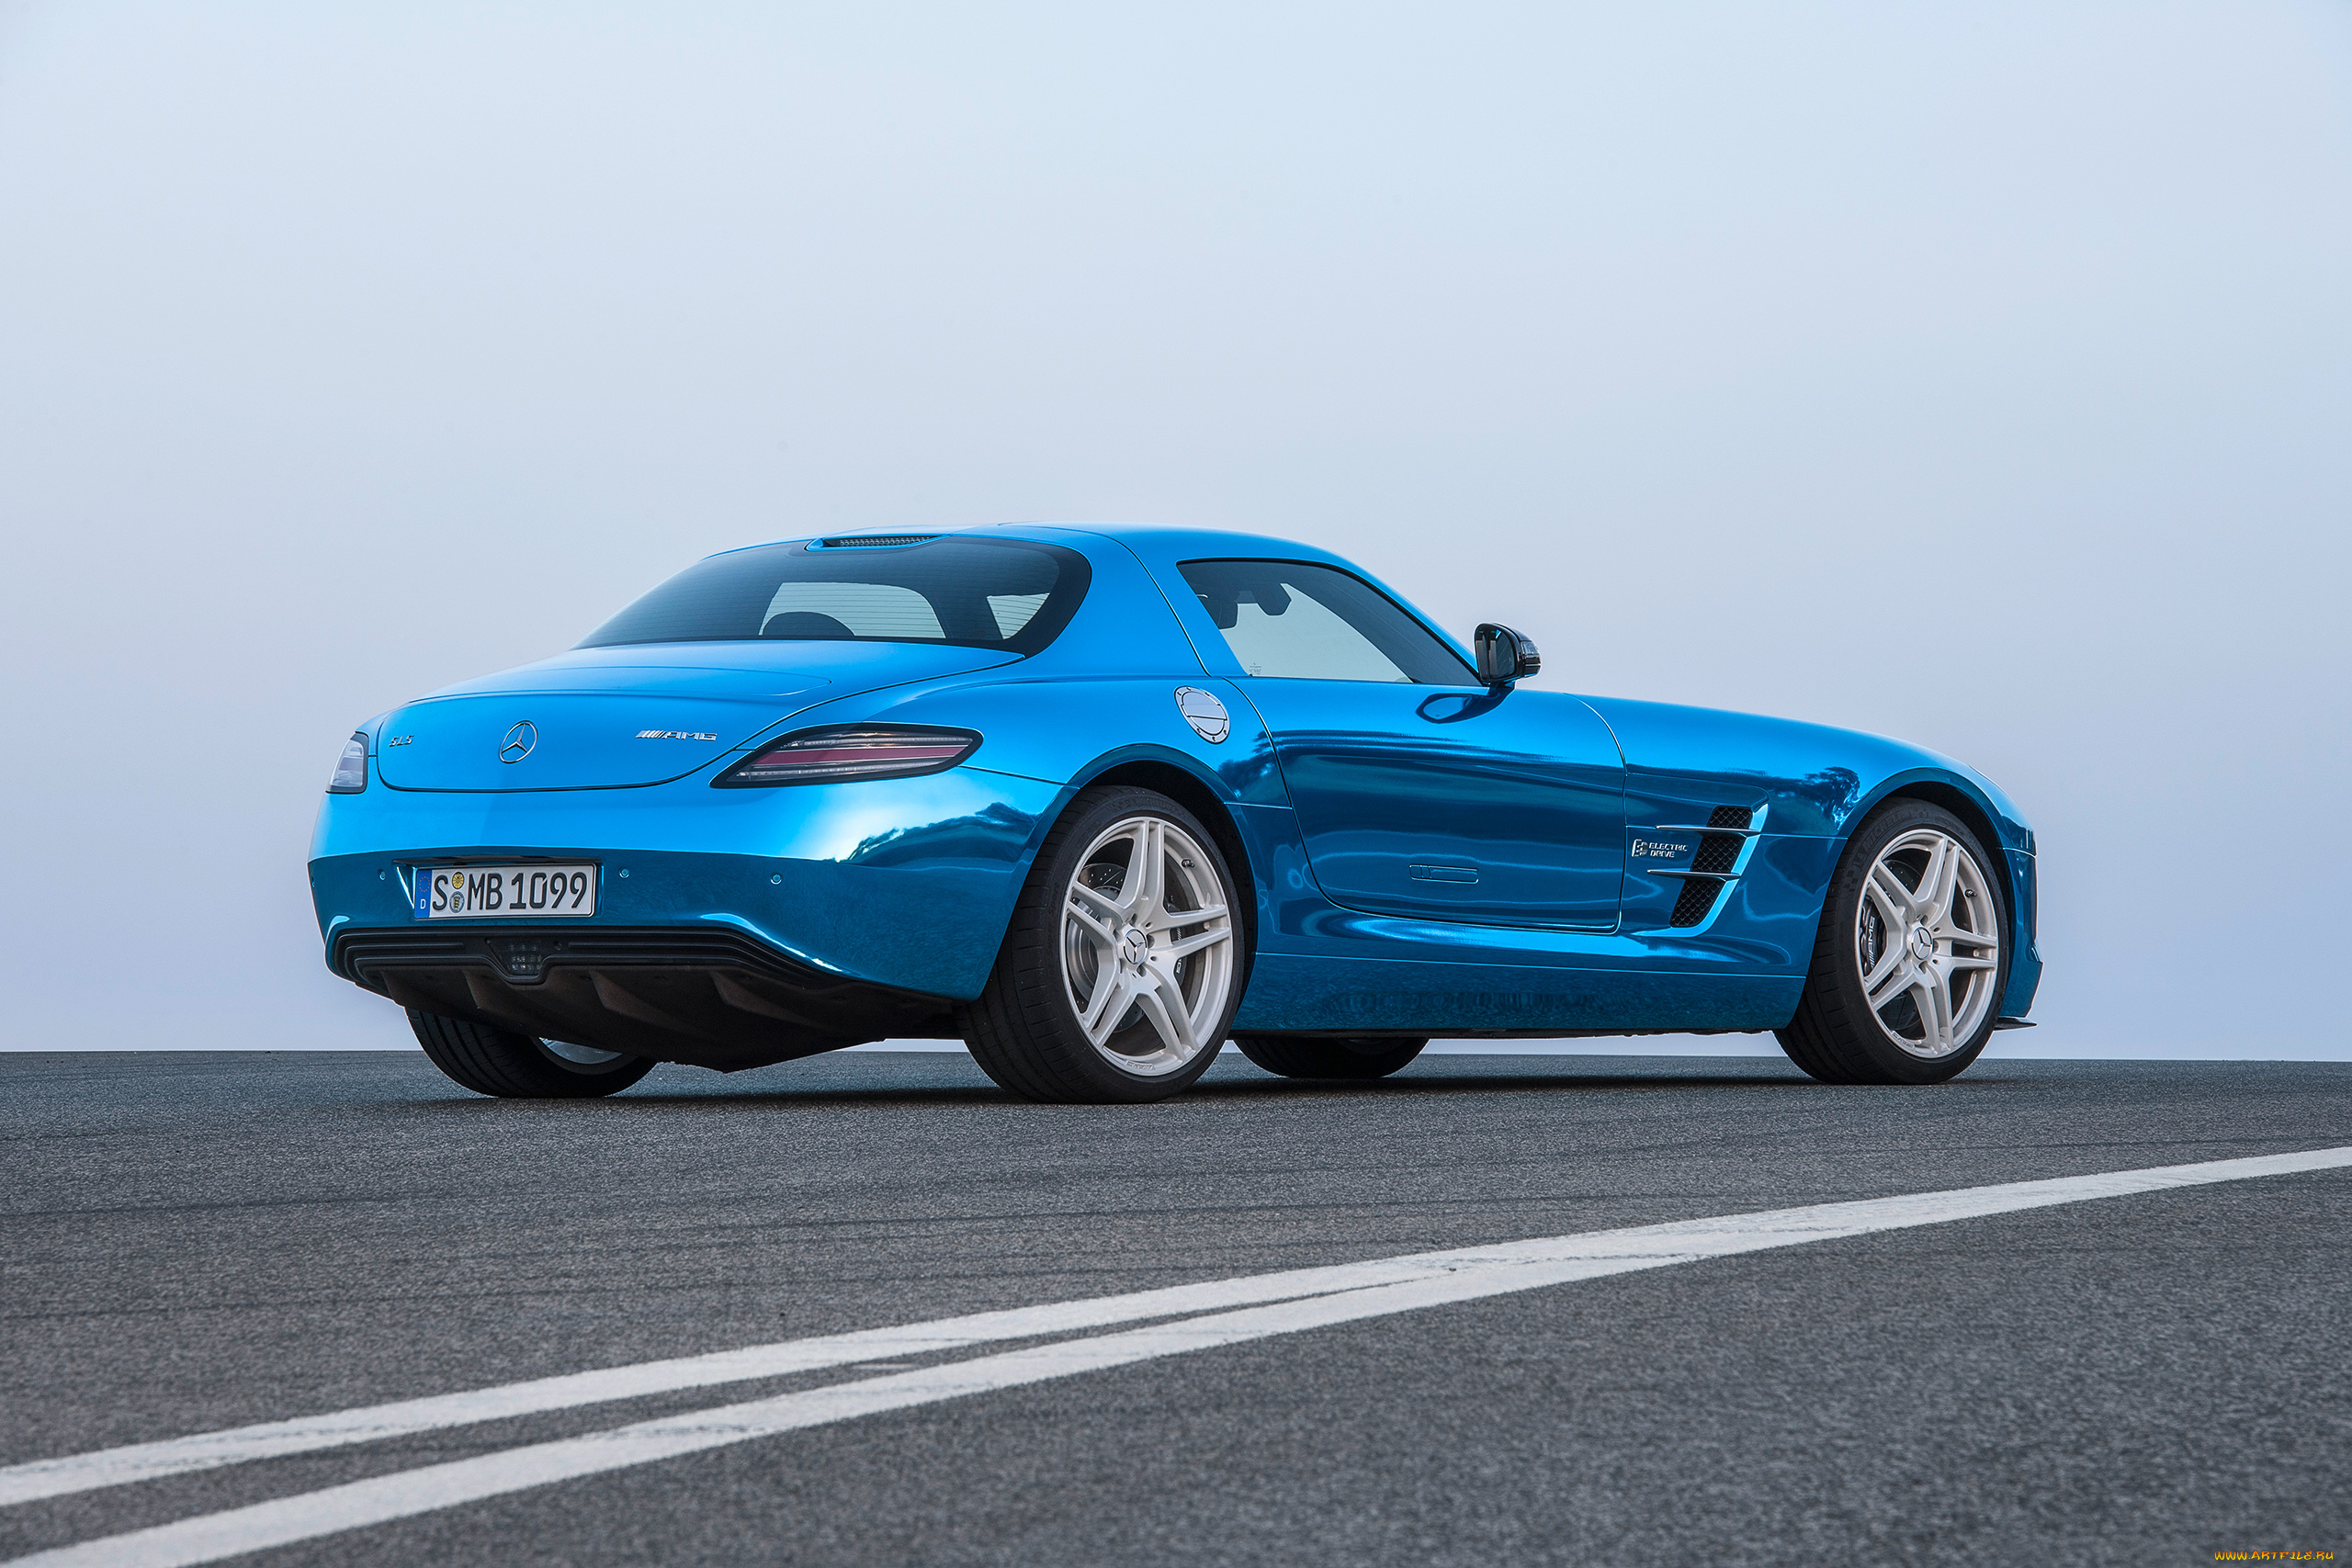 mercedes-benz, sls, amg, coupe, electric, car, 2014, автомобили, mercedes-benz, 2014, blue, sls, car, electric, coupe, amg